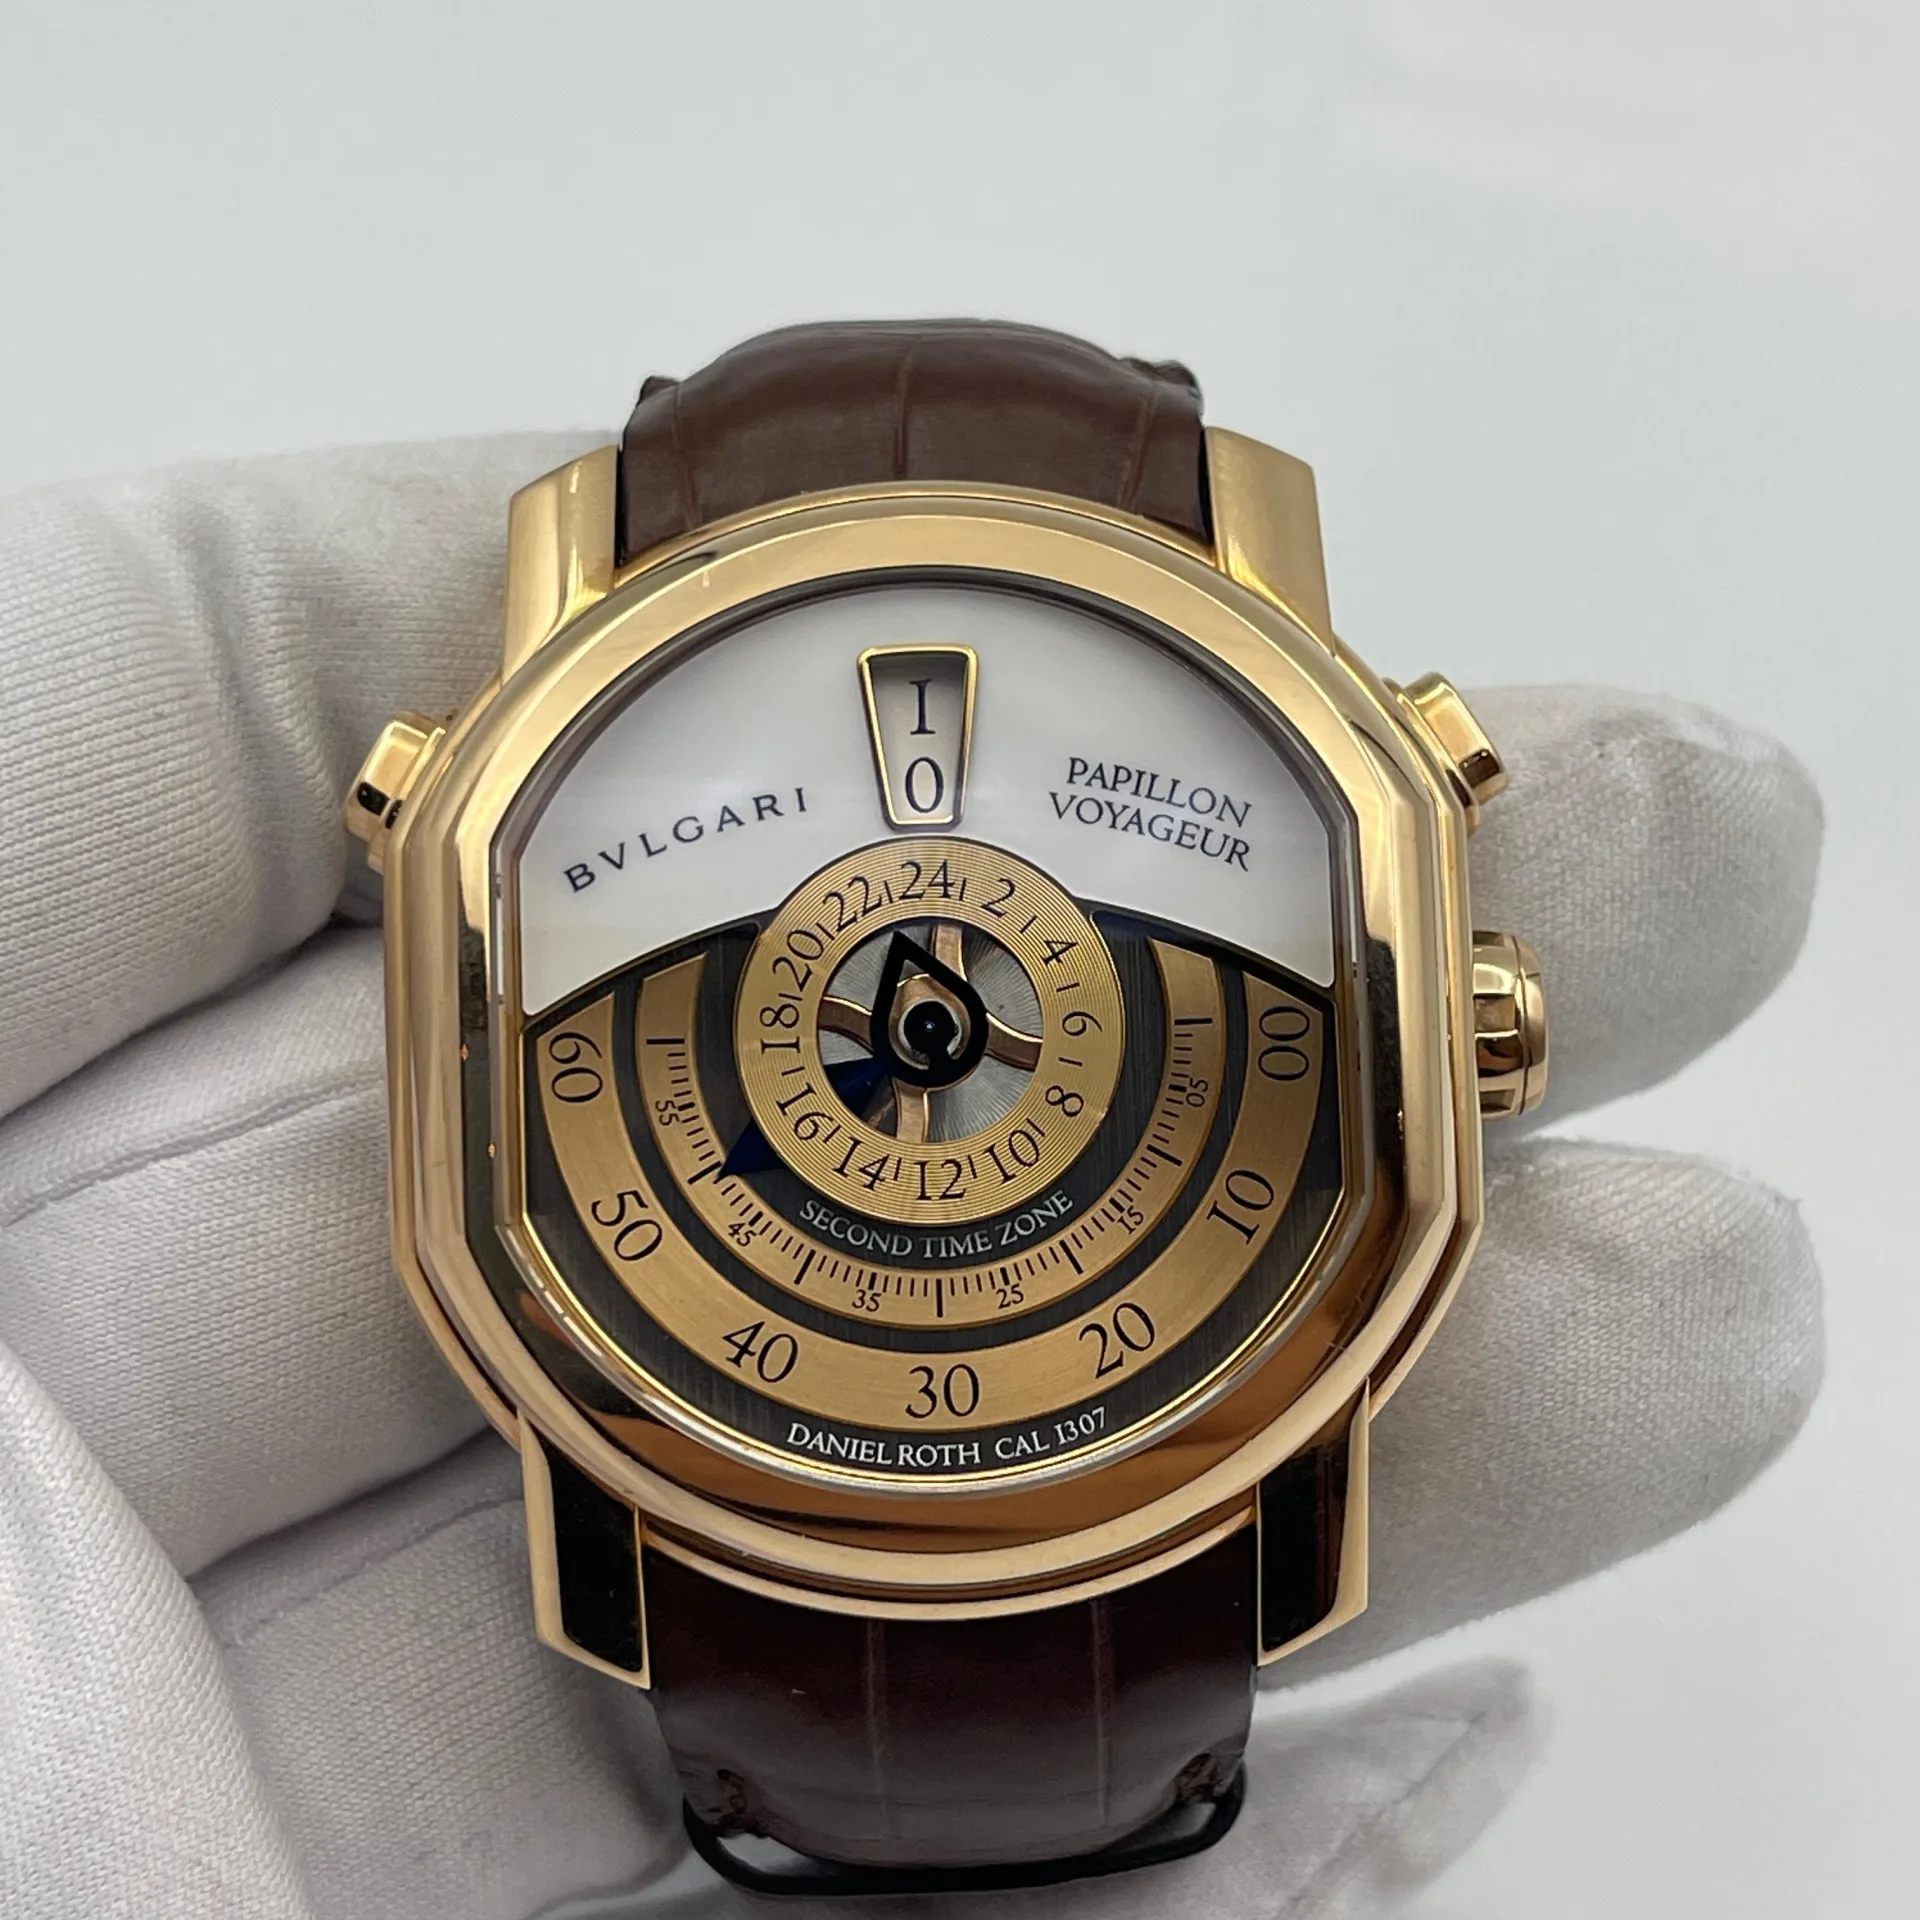 Bvlgari Daniel Roth Papillon Voyageur - Limited to 99 101835 Listing Image